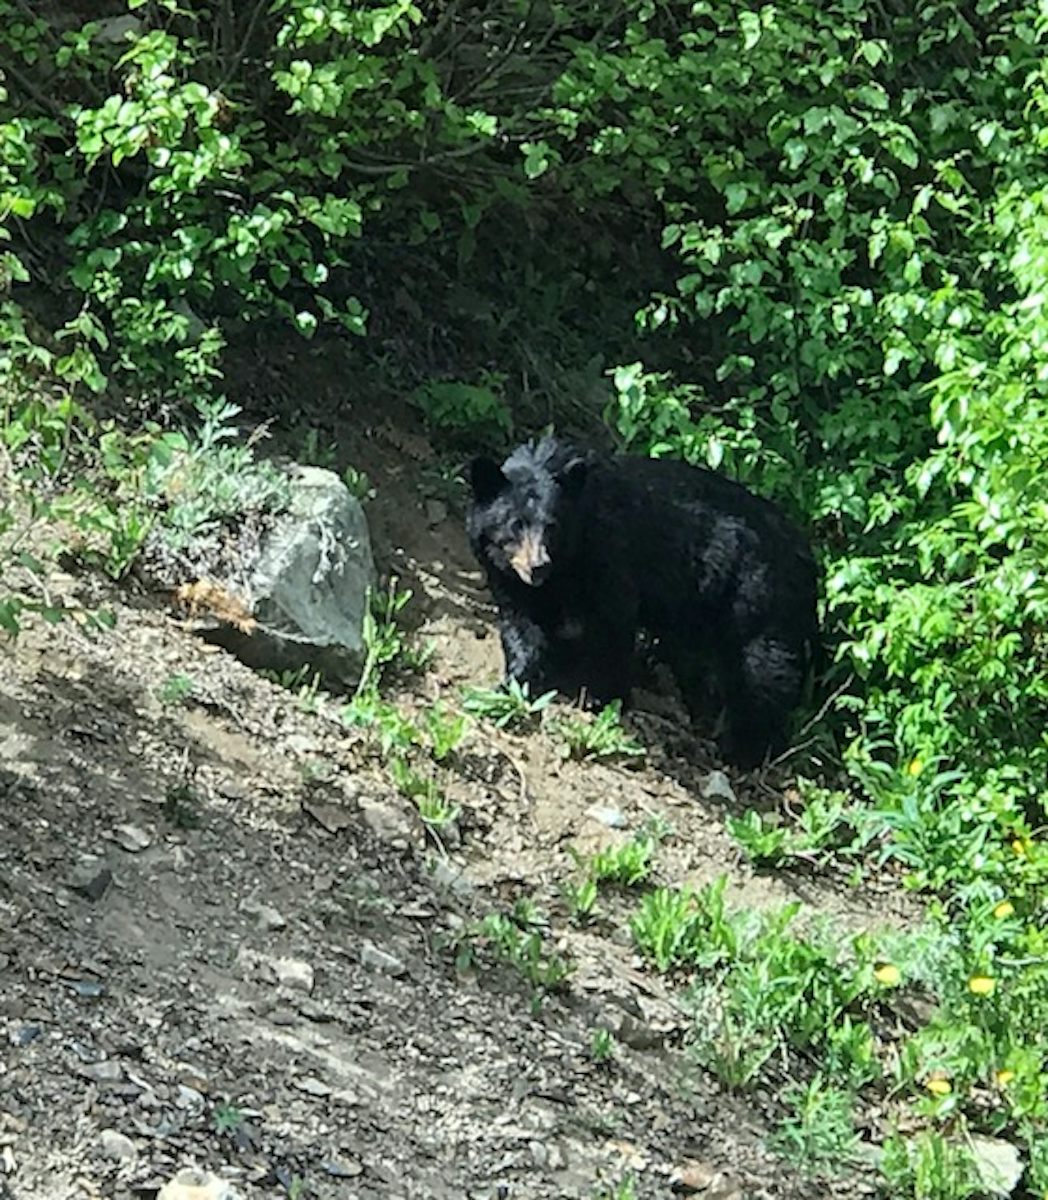 Saw this black bear by the side of the road when we were returning from the